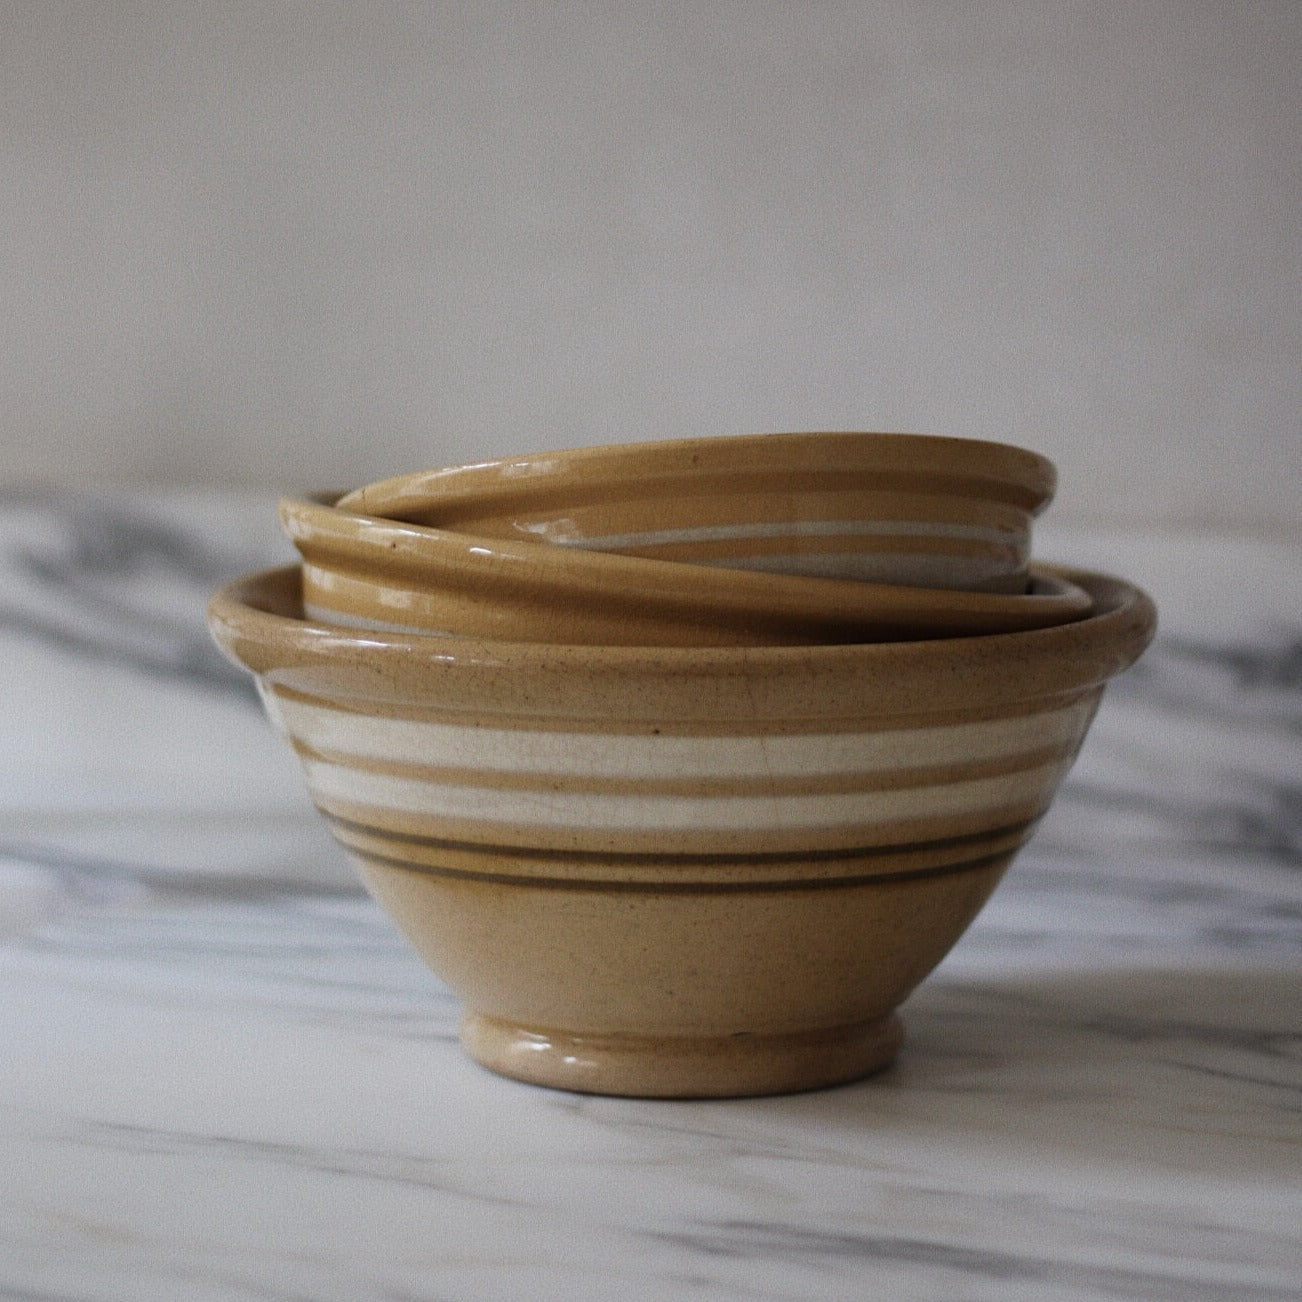 Yellow Ware Bowls for Cheerful, Vintage Vibes